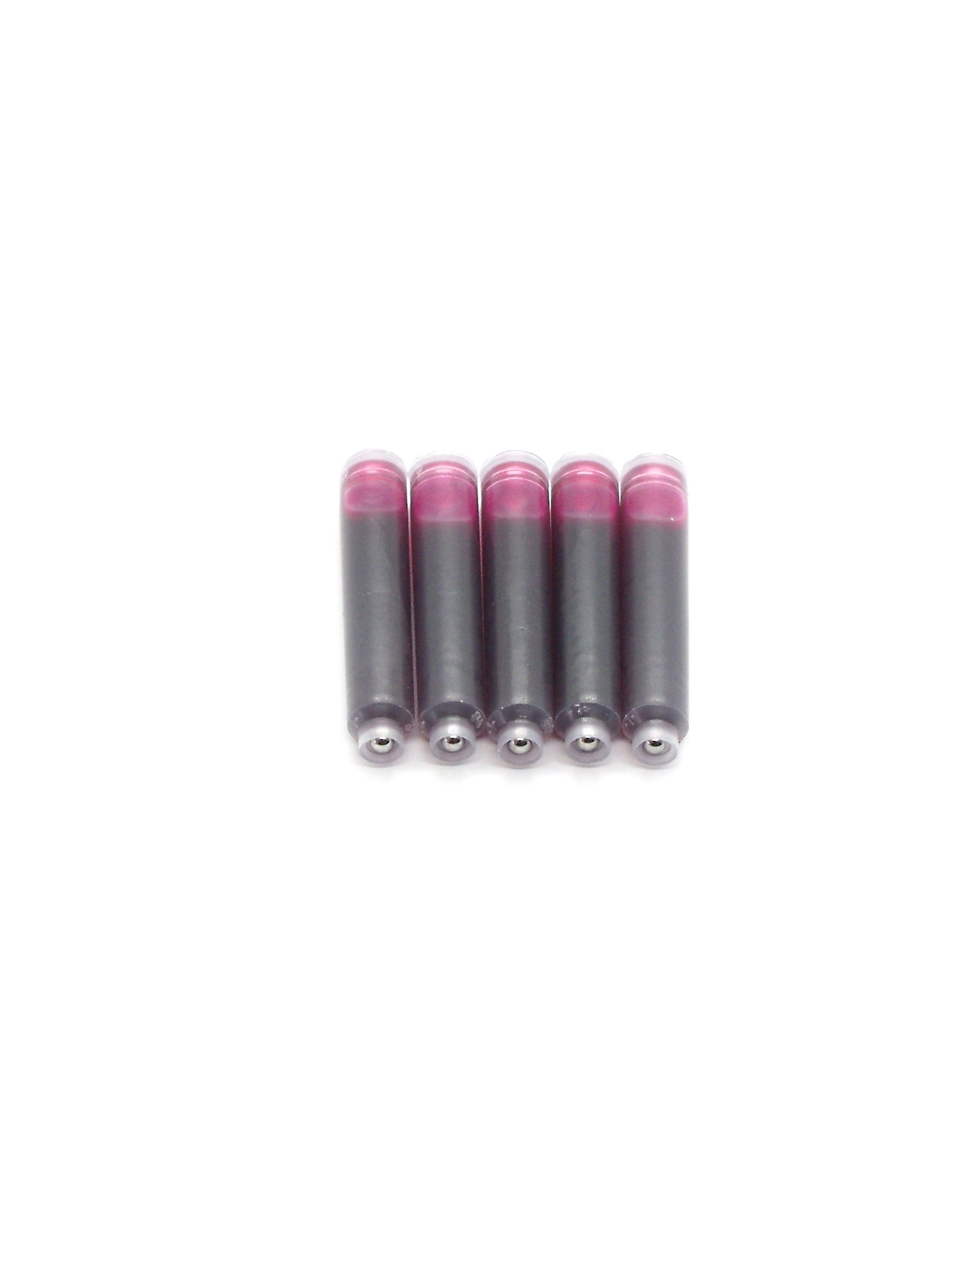 Top Ink Cartridges For Staedtler Fountain Pens (Pink)